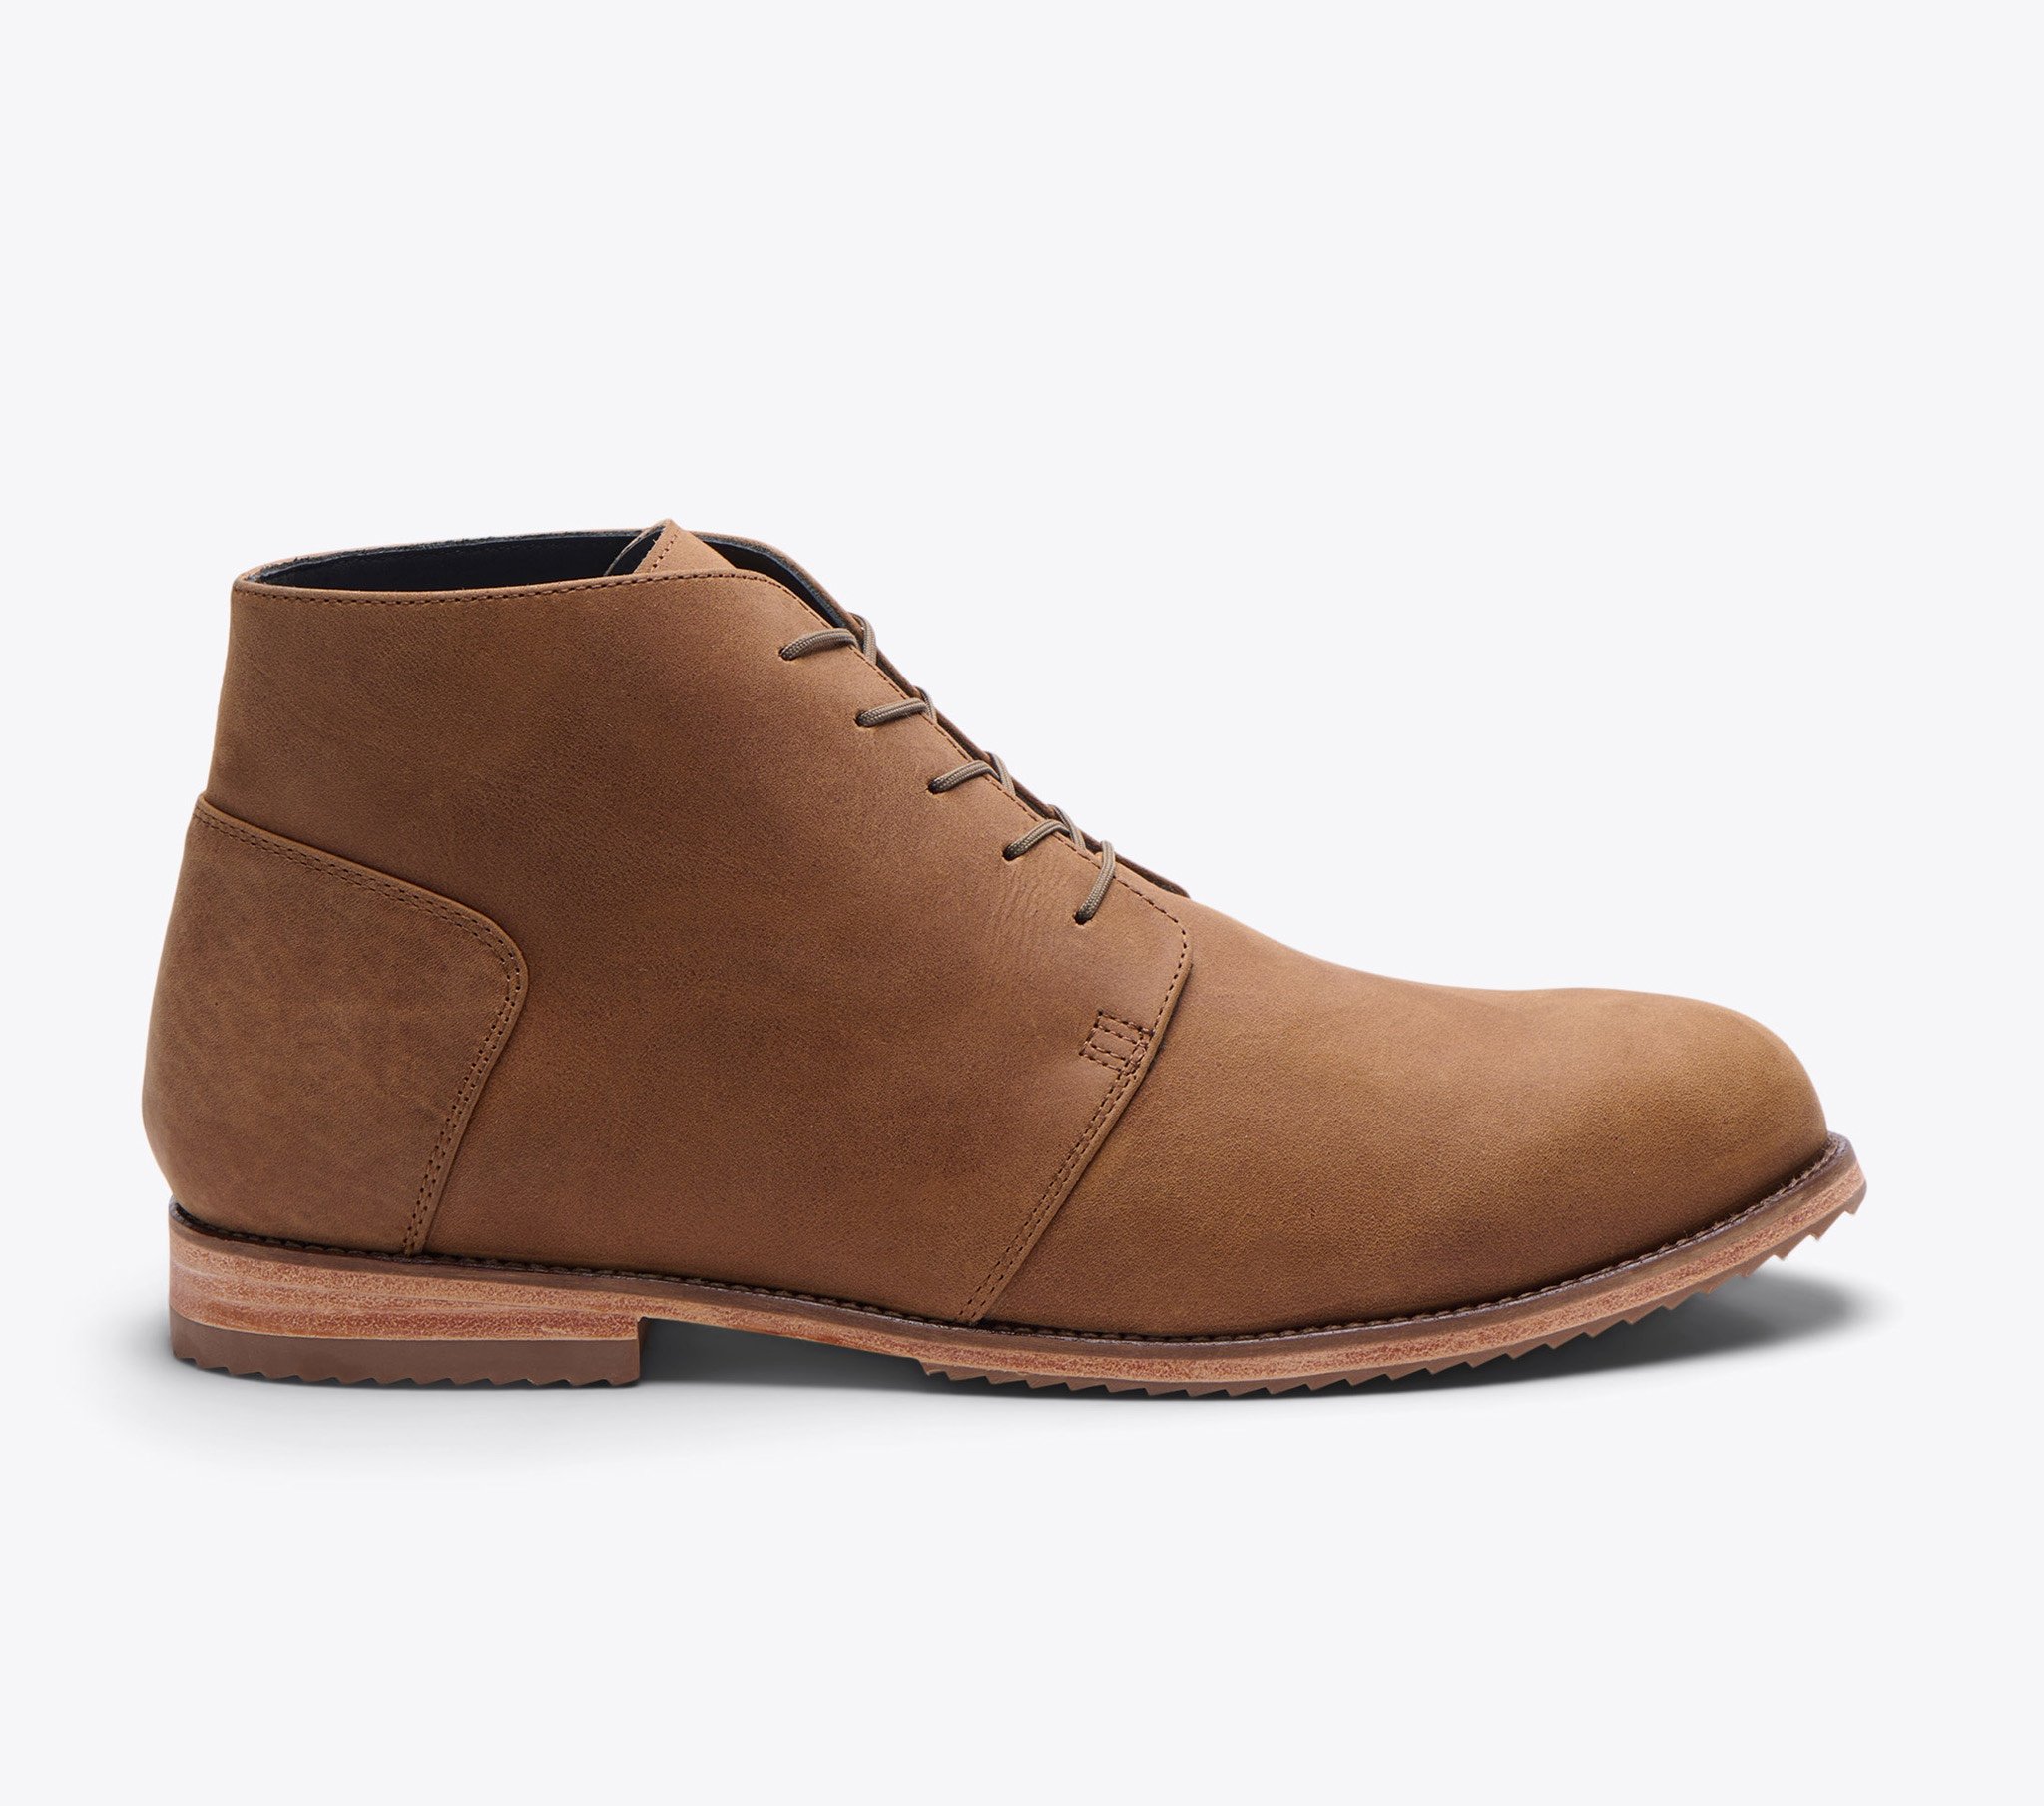 Nisolo Everyday Chukka Tobacco - Every Nisolo product is built on the foundation of comfort, function, and design. 